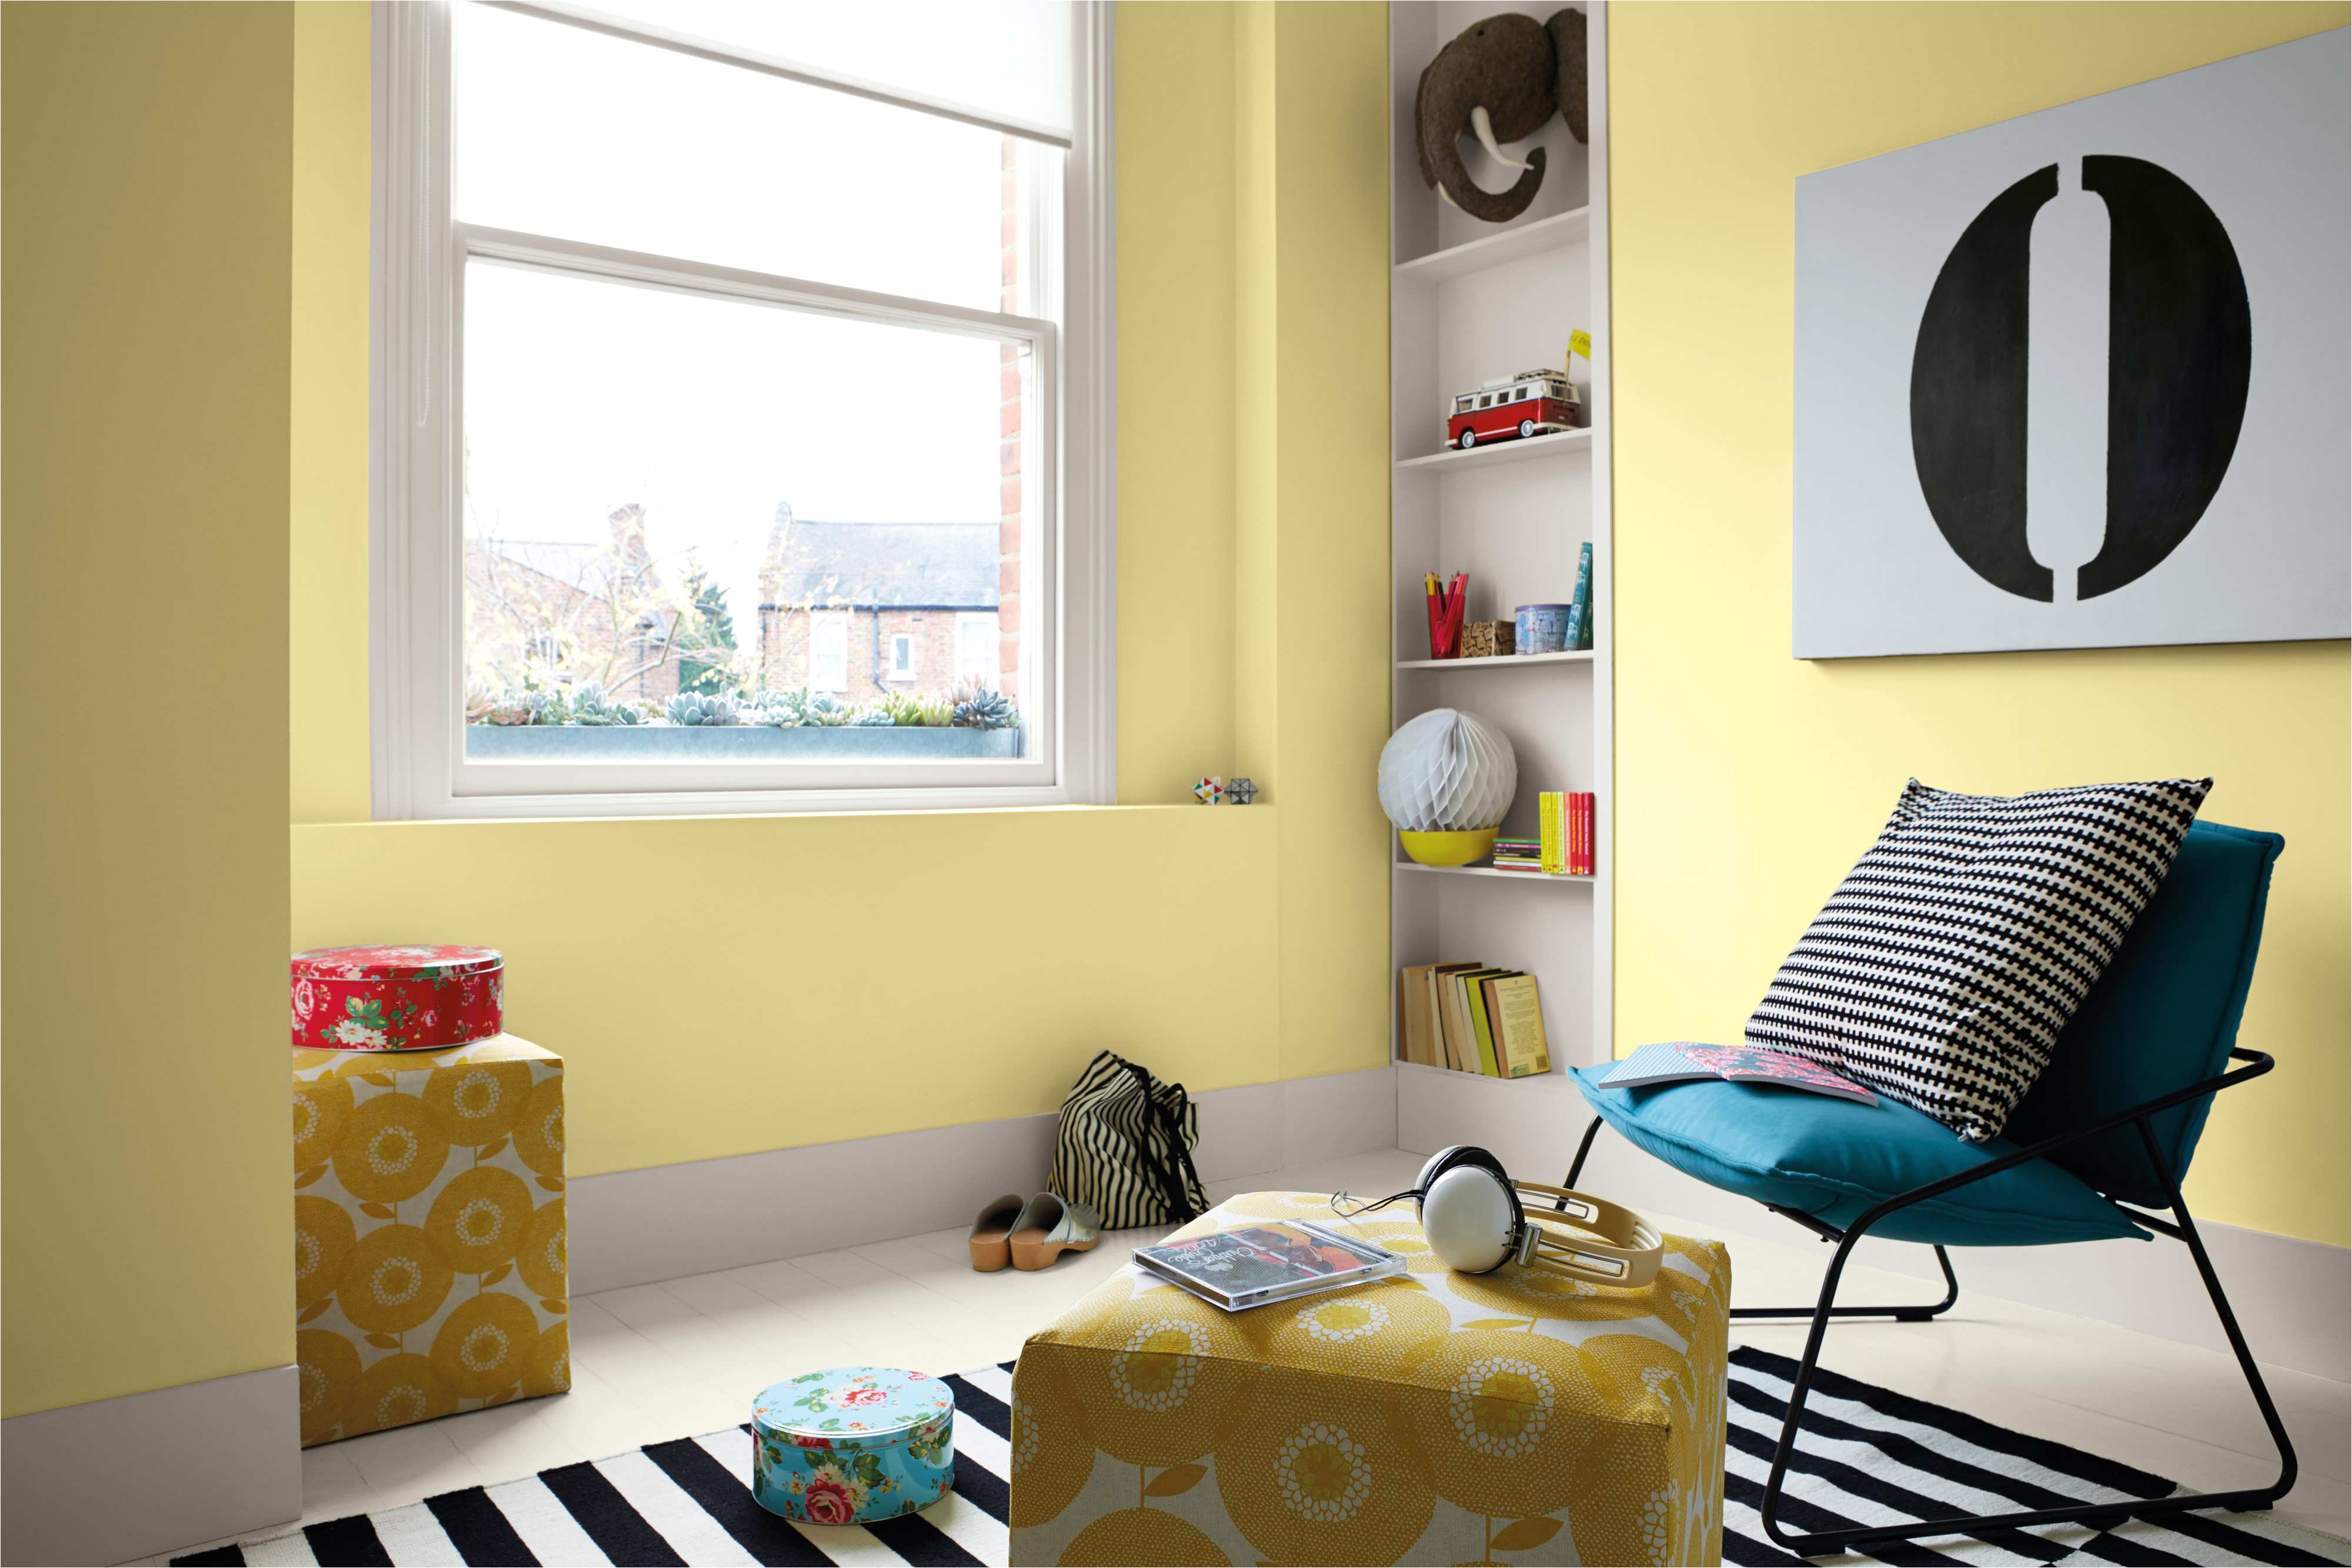 decorating ideas for yellow rooms new yellow and grey bedroom decorating ideas home design yellow and